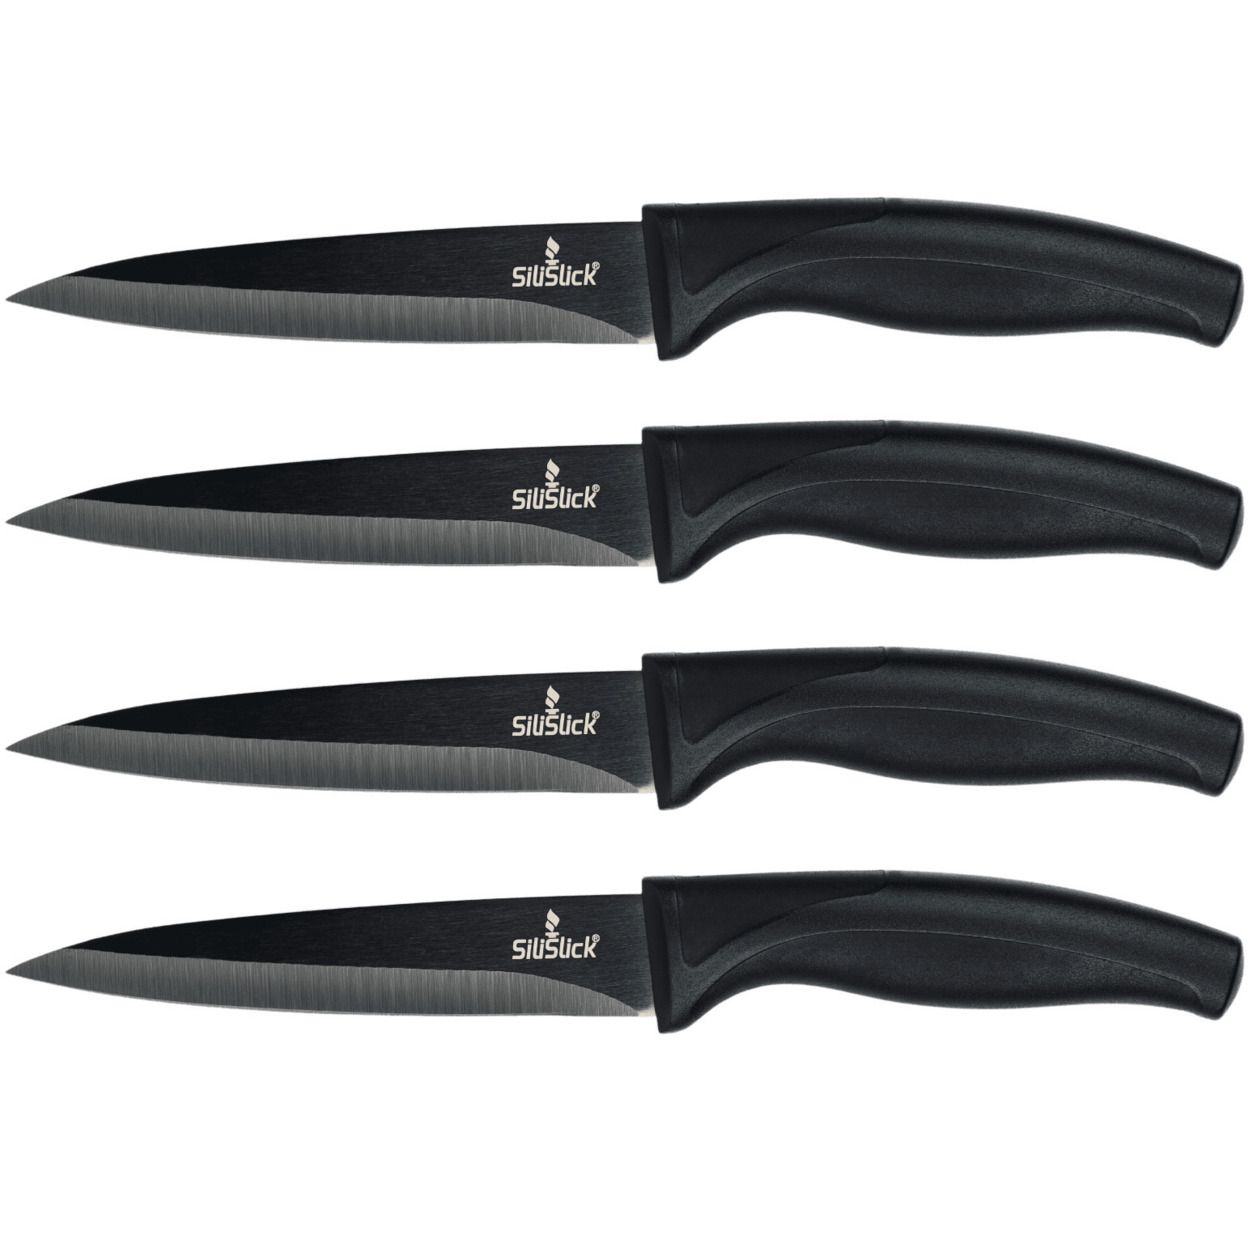 SiliSlick Stainless Steel Steak Knife Black Handle And Blade Set Of 4 - Titanium Coated Kitchen Straight Edge For Cutting Meat